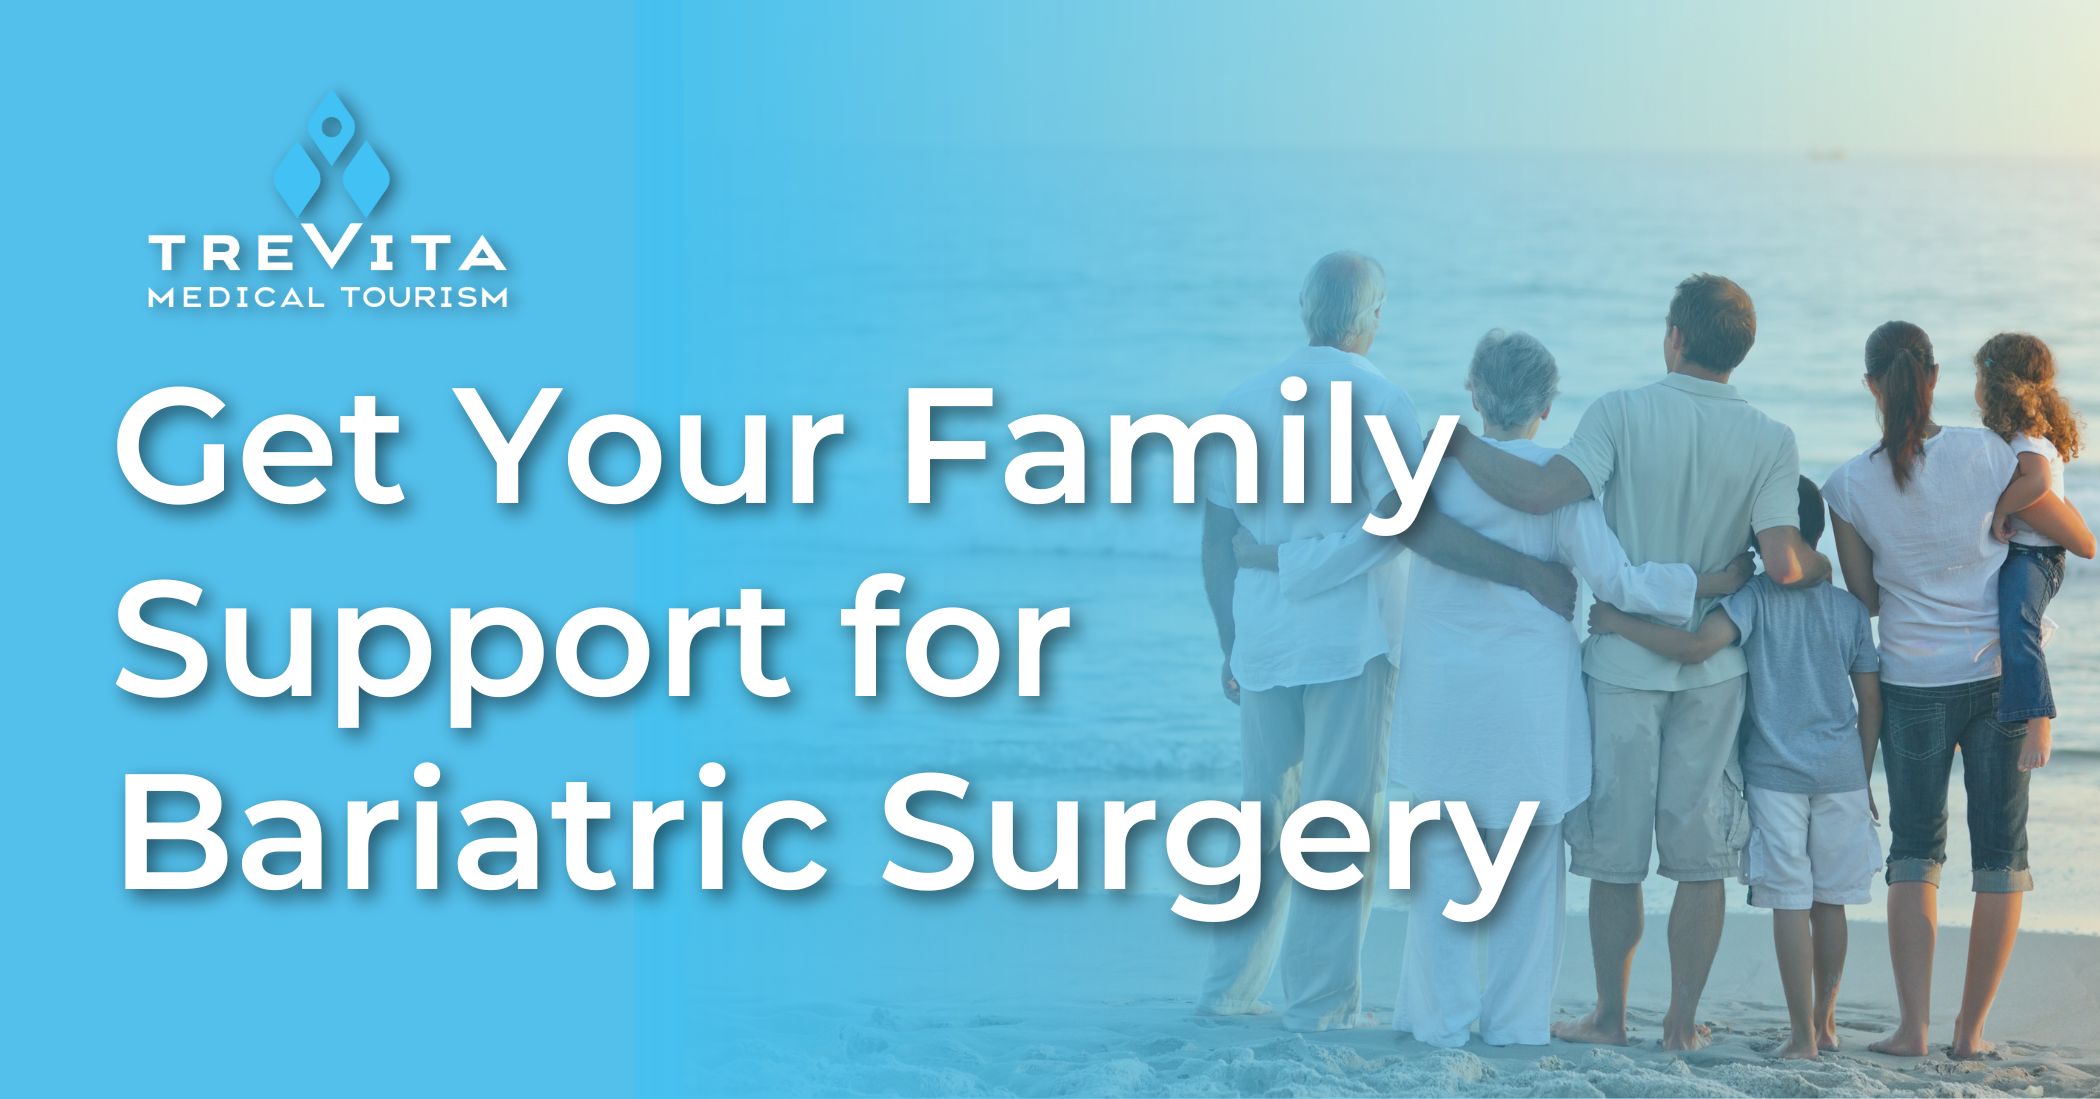 How to: et Your Family Support for Bariatric Surgery